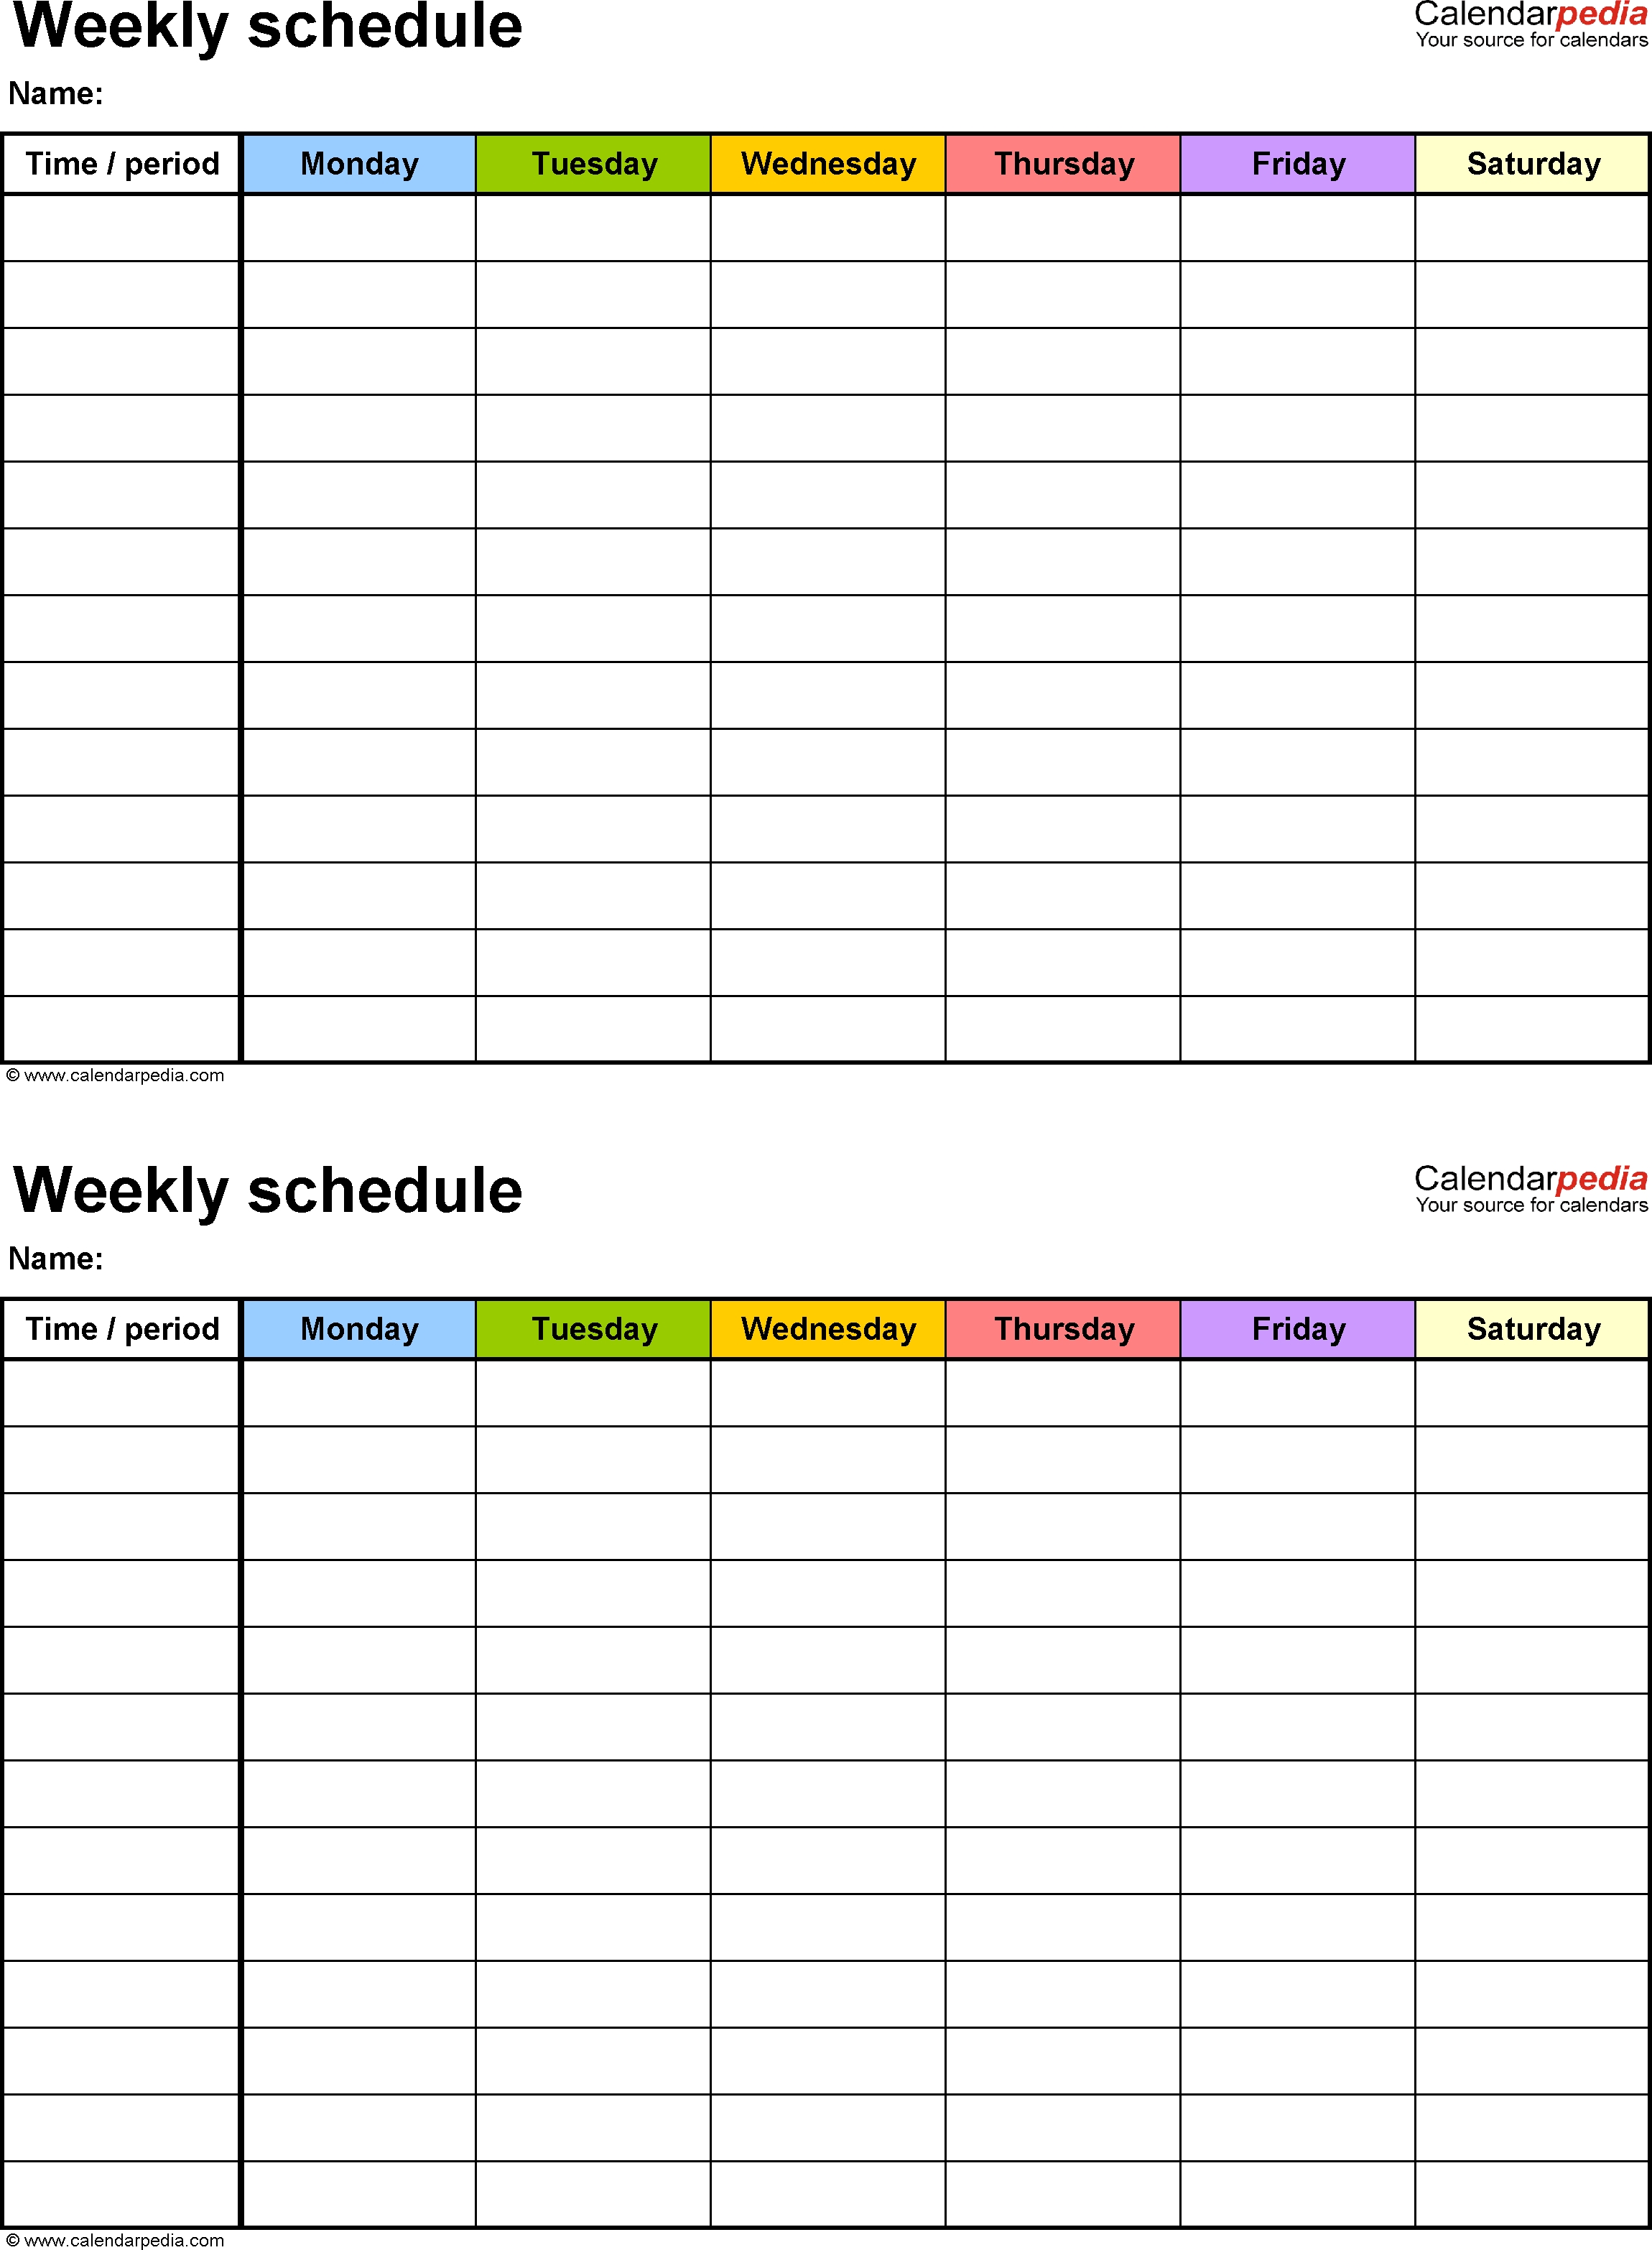 Free Weekly Schedule Templates For Excel - 18 Templates pertaining to Excel Day Planner Template Free